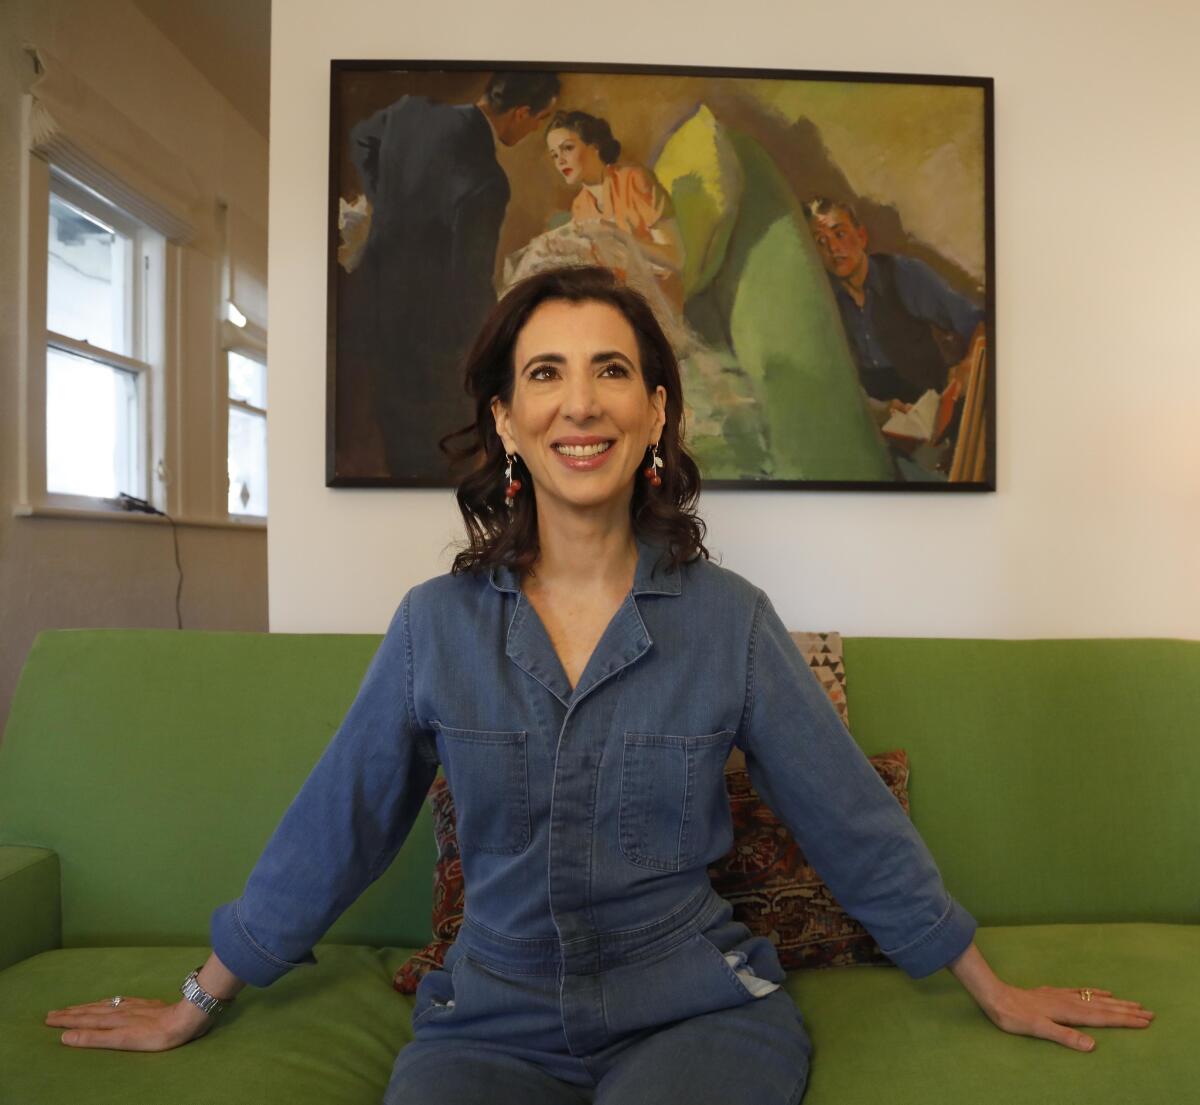 "Crazy Ex-Girlfriend" co-creator and showrunner Aline Brosh McKenna has also written the screenplays for the movies "The Devil Wears Prada," "27 Dresses," "We Bought a Zoo," and "Morning Glory."